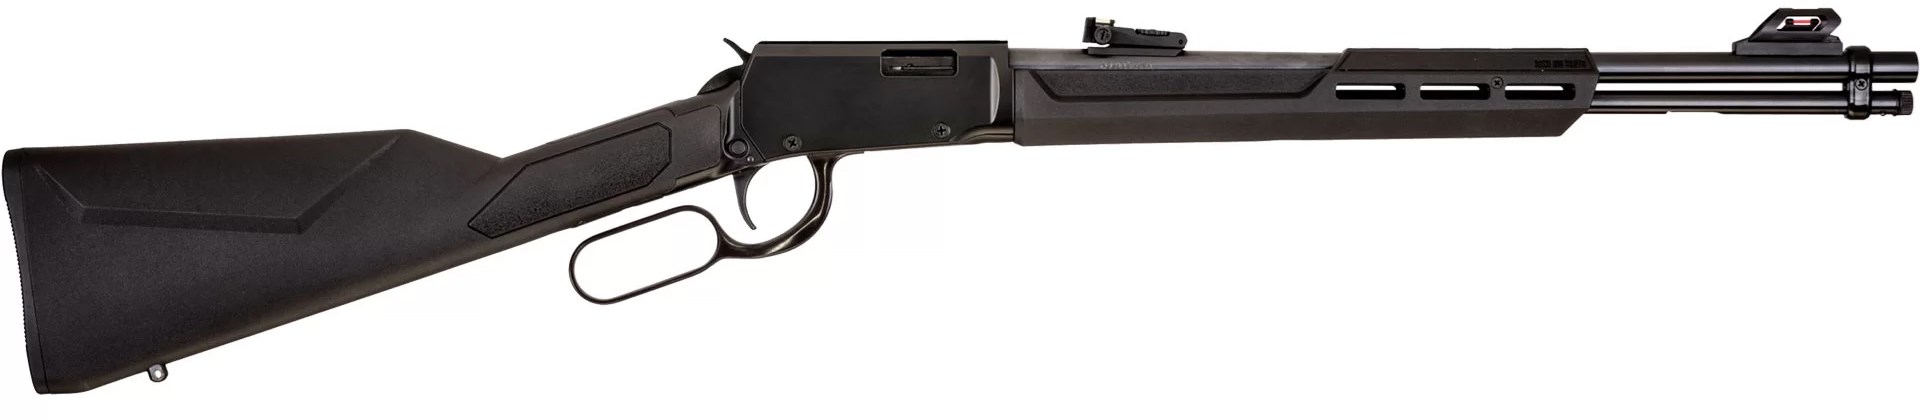 Right-side view Rossi Rio Bravo youth size lever-action training rifle .22 lr black stock gun